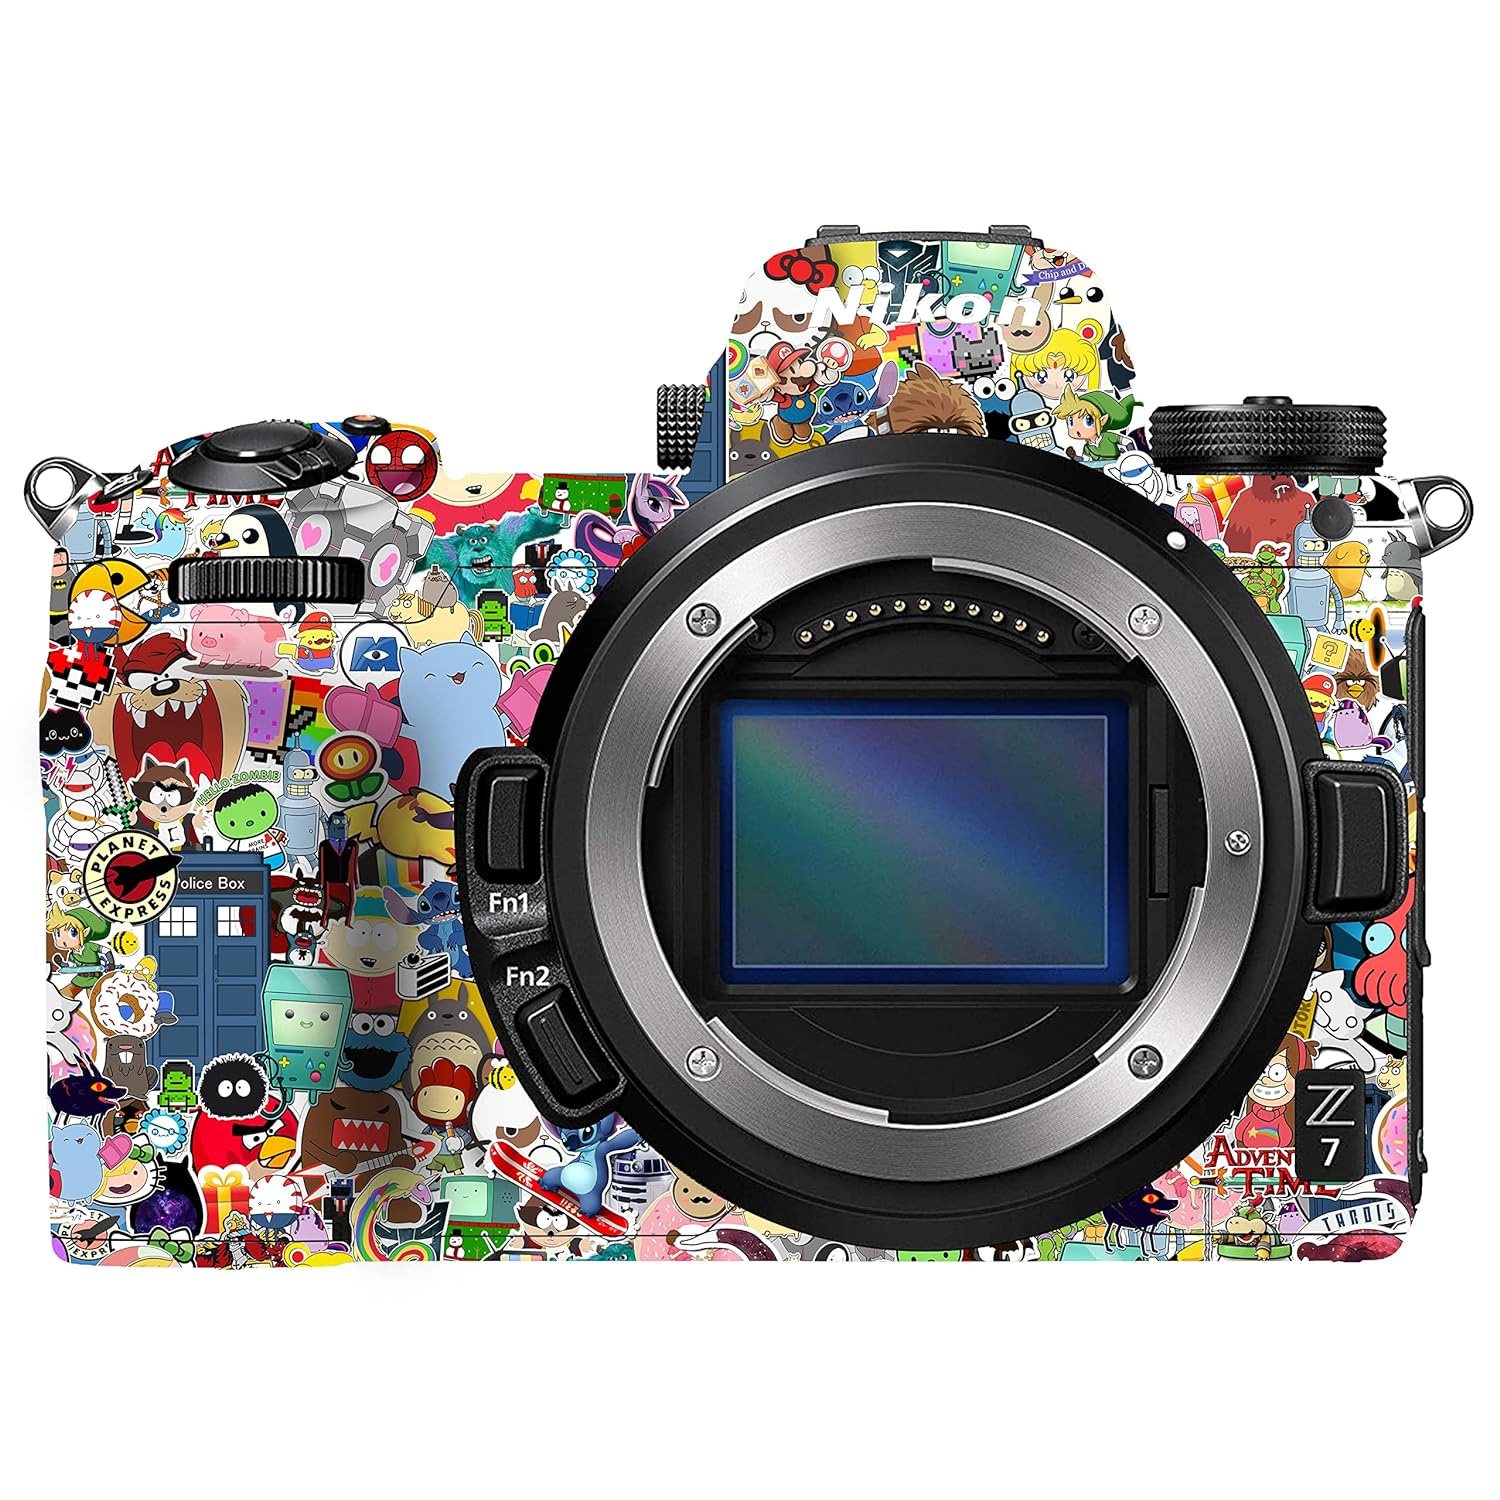 Read more about the article WRAPTURE. Premium DSLR Camera Scratchproof Protective Skin for Nikon Z7 – No Residue Removal, Bubble Free, Scratch Resistant, Stretchable, HD Quality Printed – HDCS-NIKZ7-013